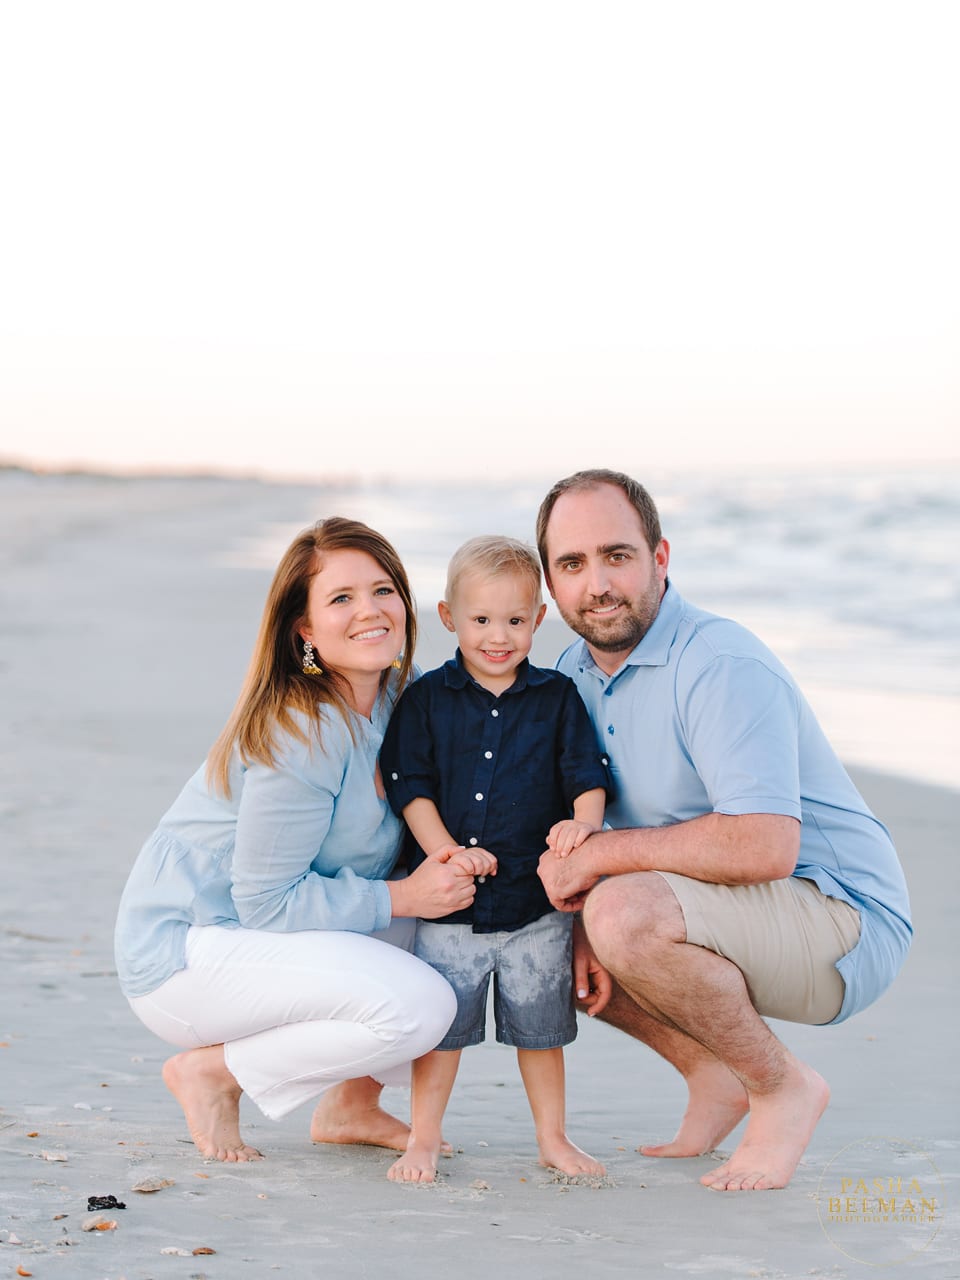 Murrells Inlet Family Photographers - Family Photography - Family Beach Pictures - Gorgeous Sunset Beach Family Pictures 